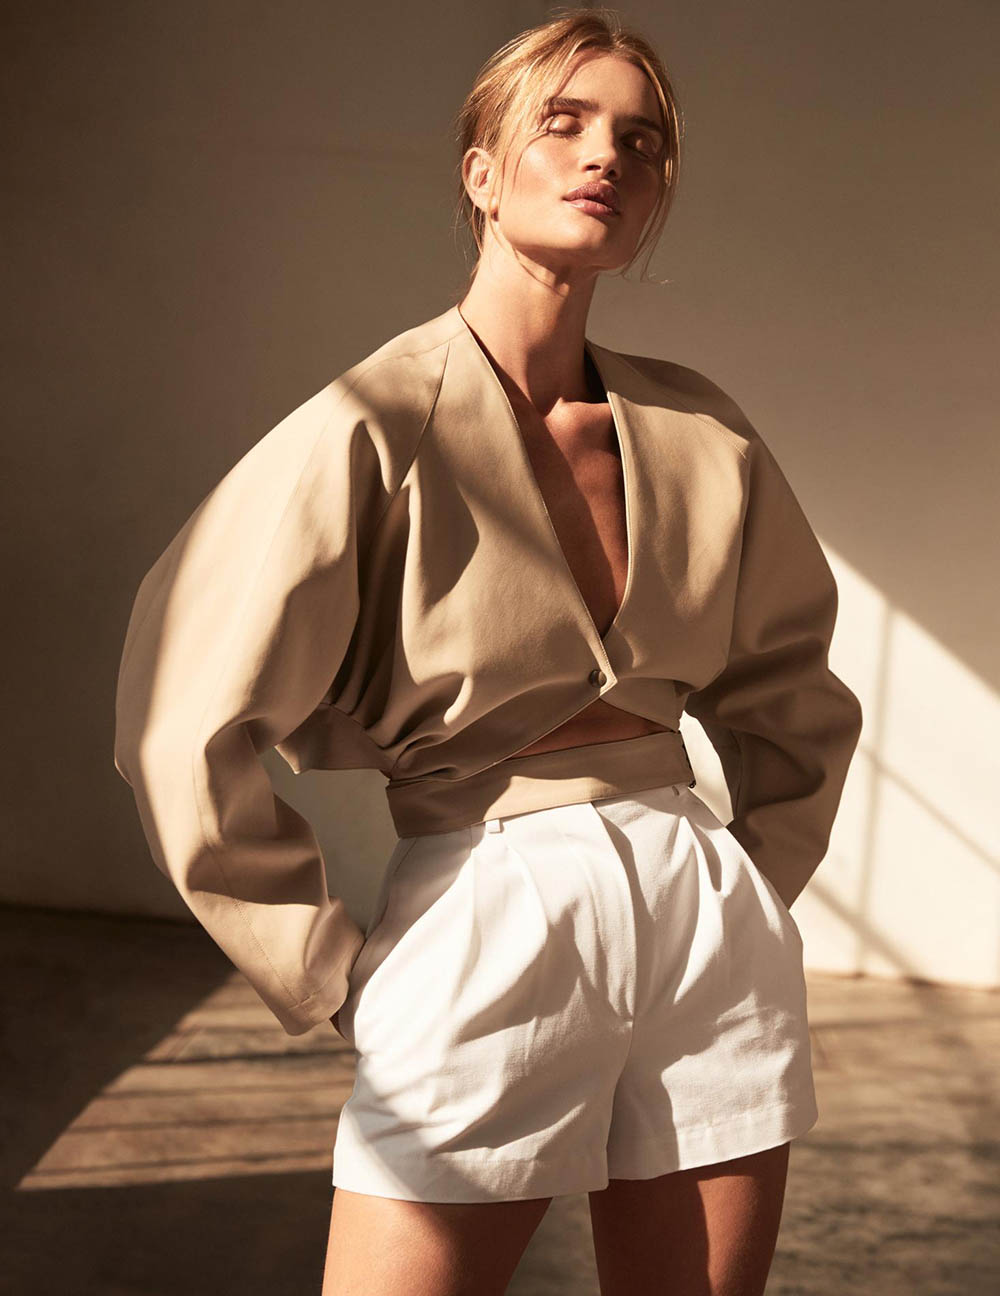 Rosie Huntington-Whiteley covers Madame Figaro February 7th, 2020 by David Roemer